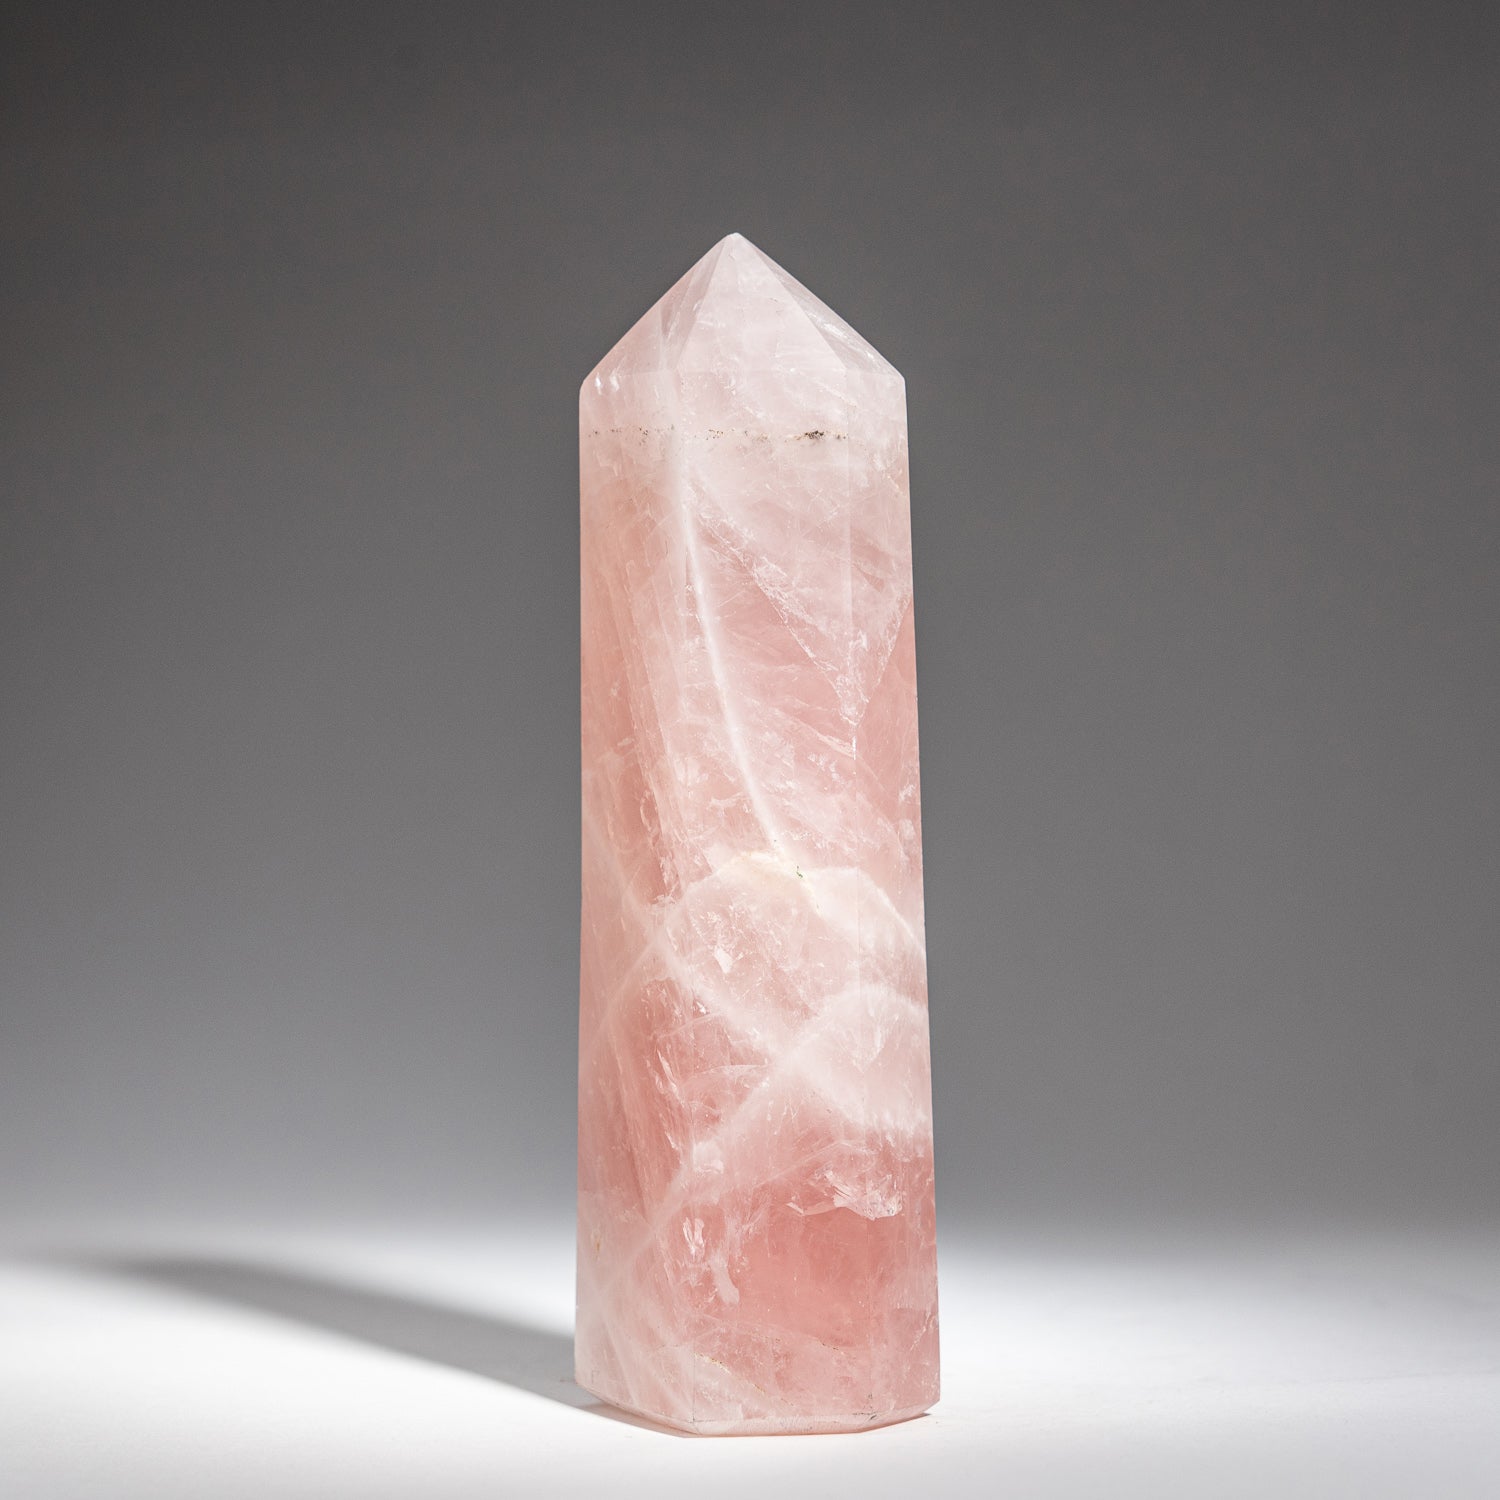 Genuine Rose Quartz Polished Point from Brazil (1.7 lbs)